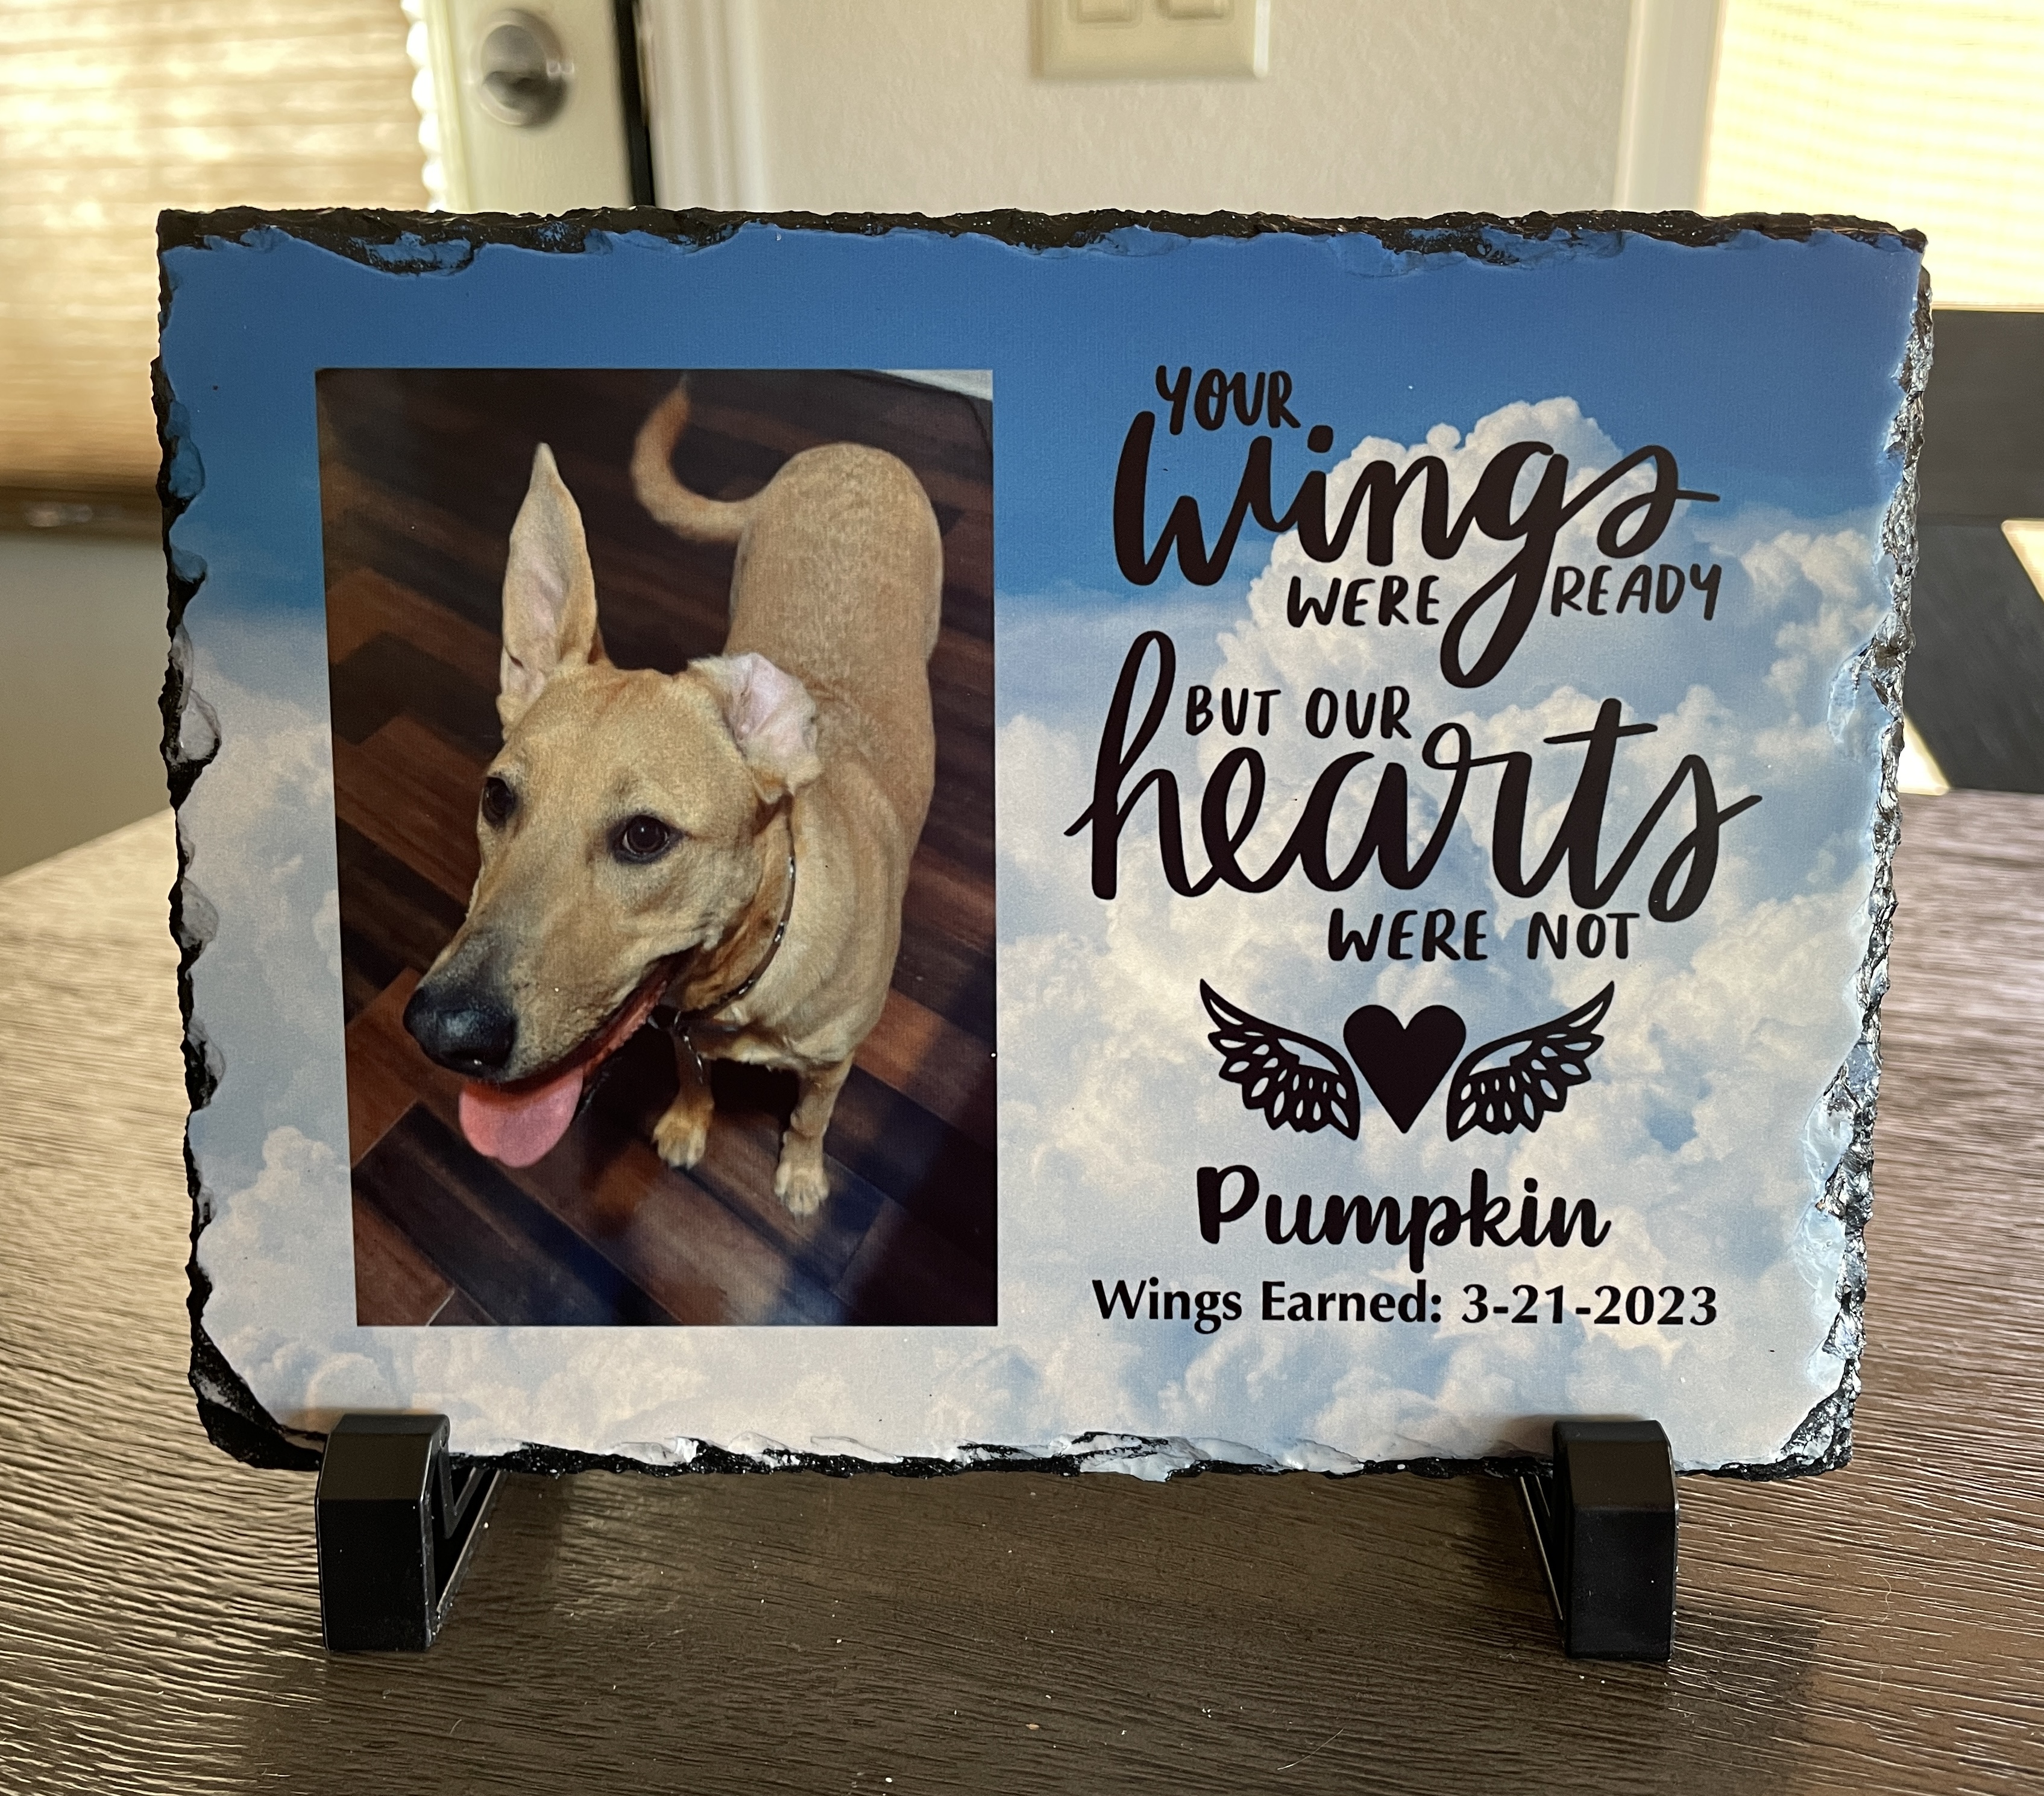 We do a lot of sublimated slates, many for a Pet Rescue here in Arizona. Sadly or orders come w